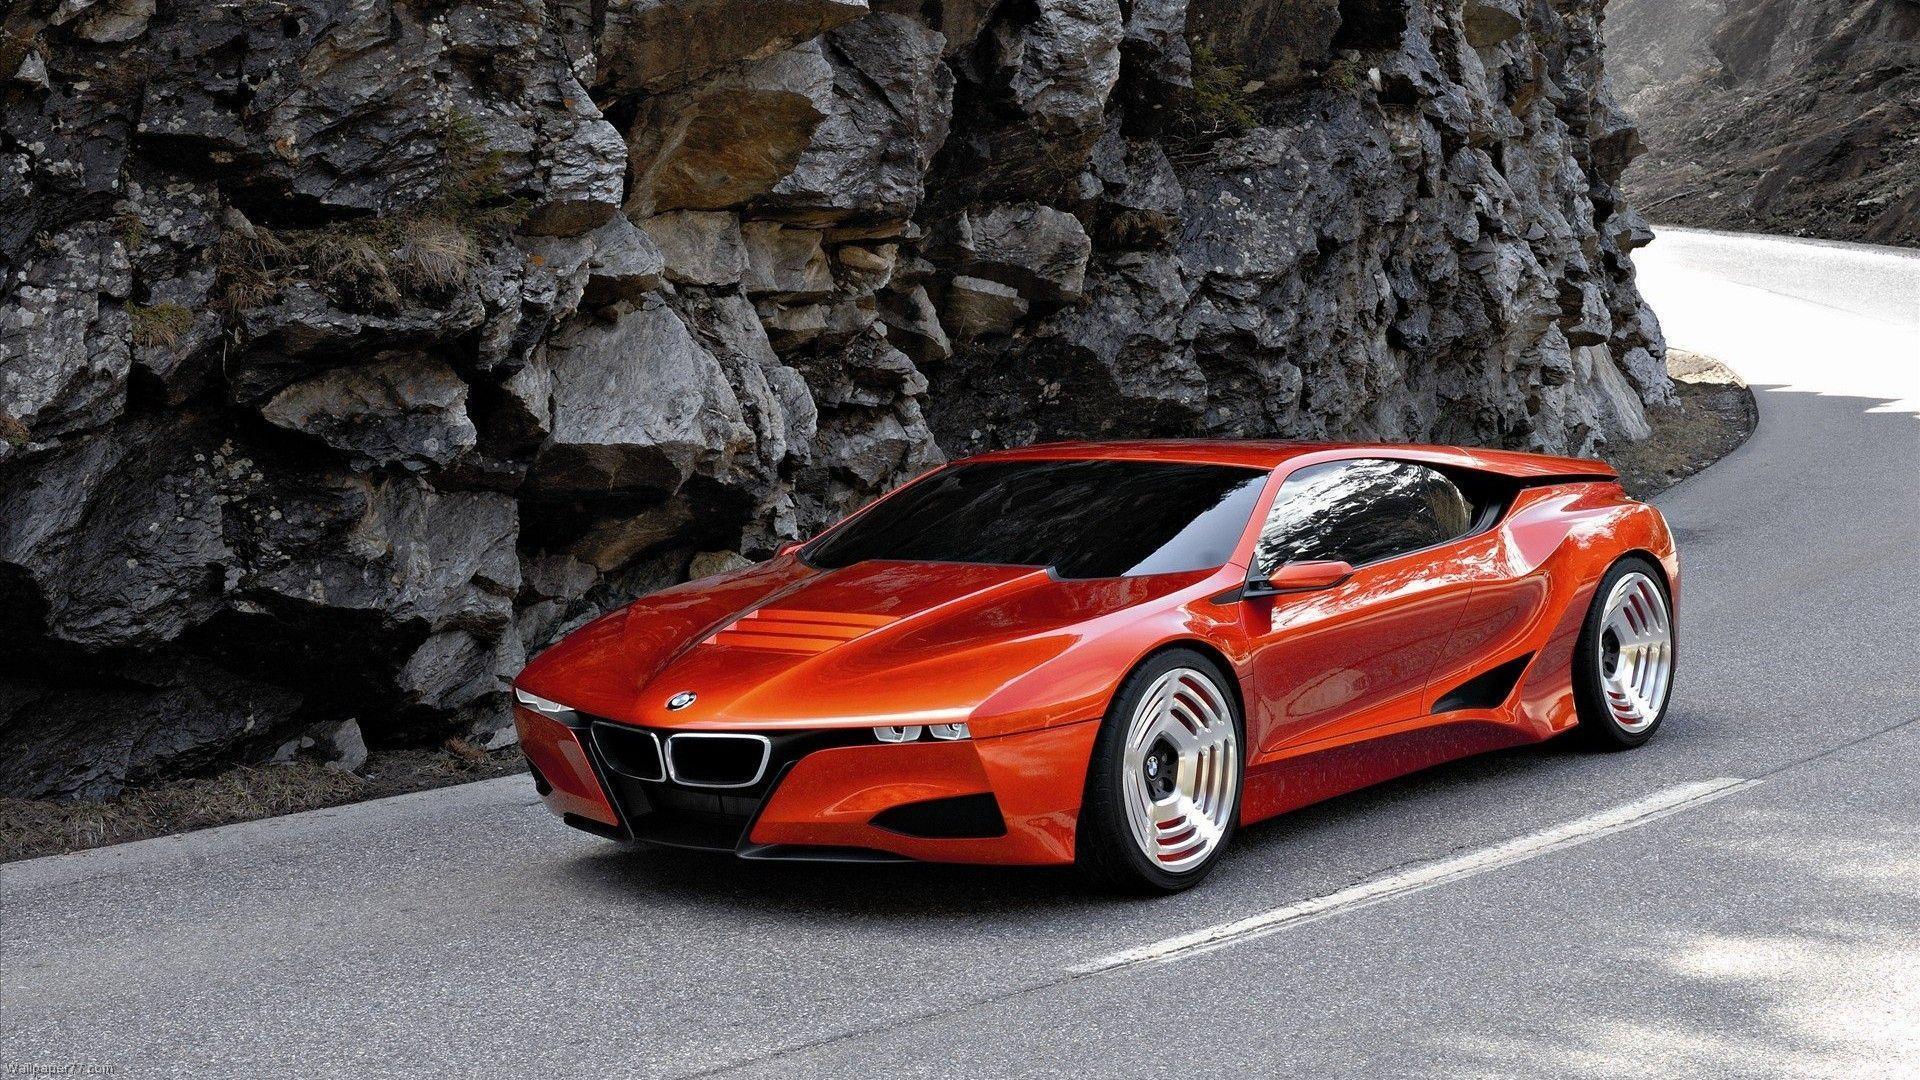 amazing bmw car wallpapers hd